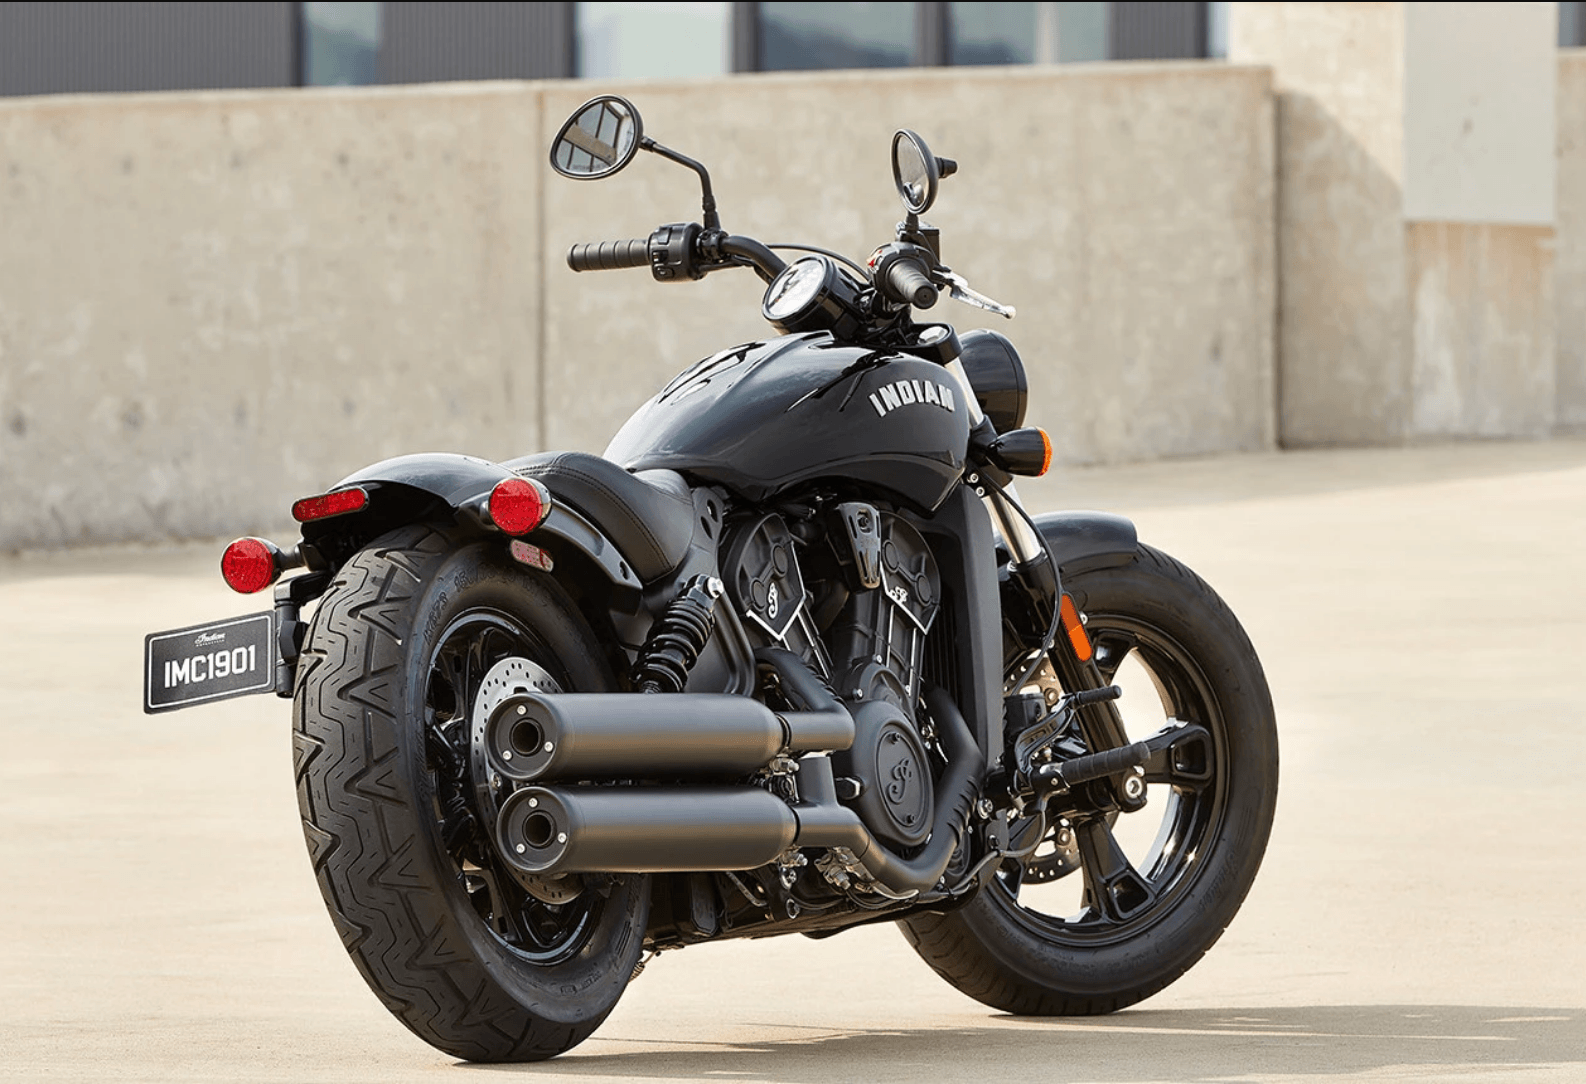 American Motorcycles Indian Scout Bobber 2018 Wallpapers